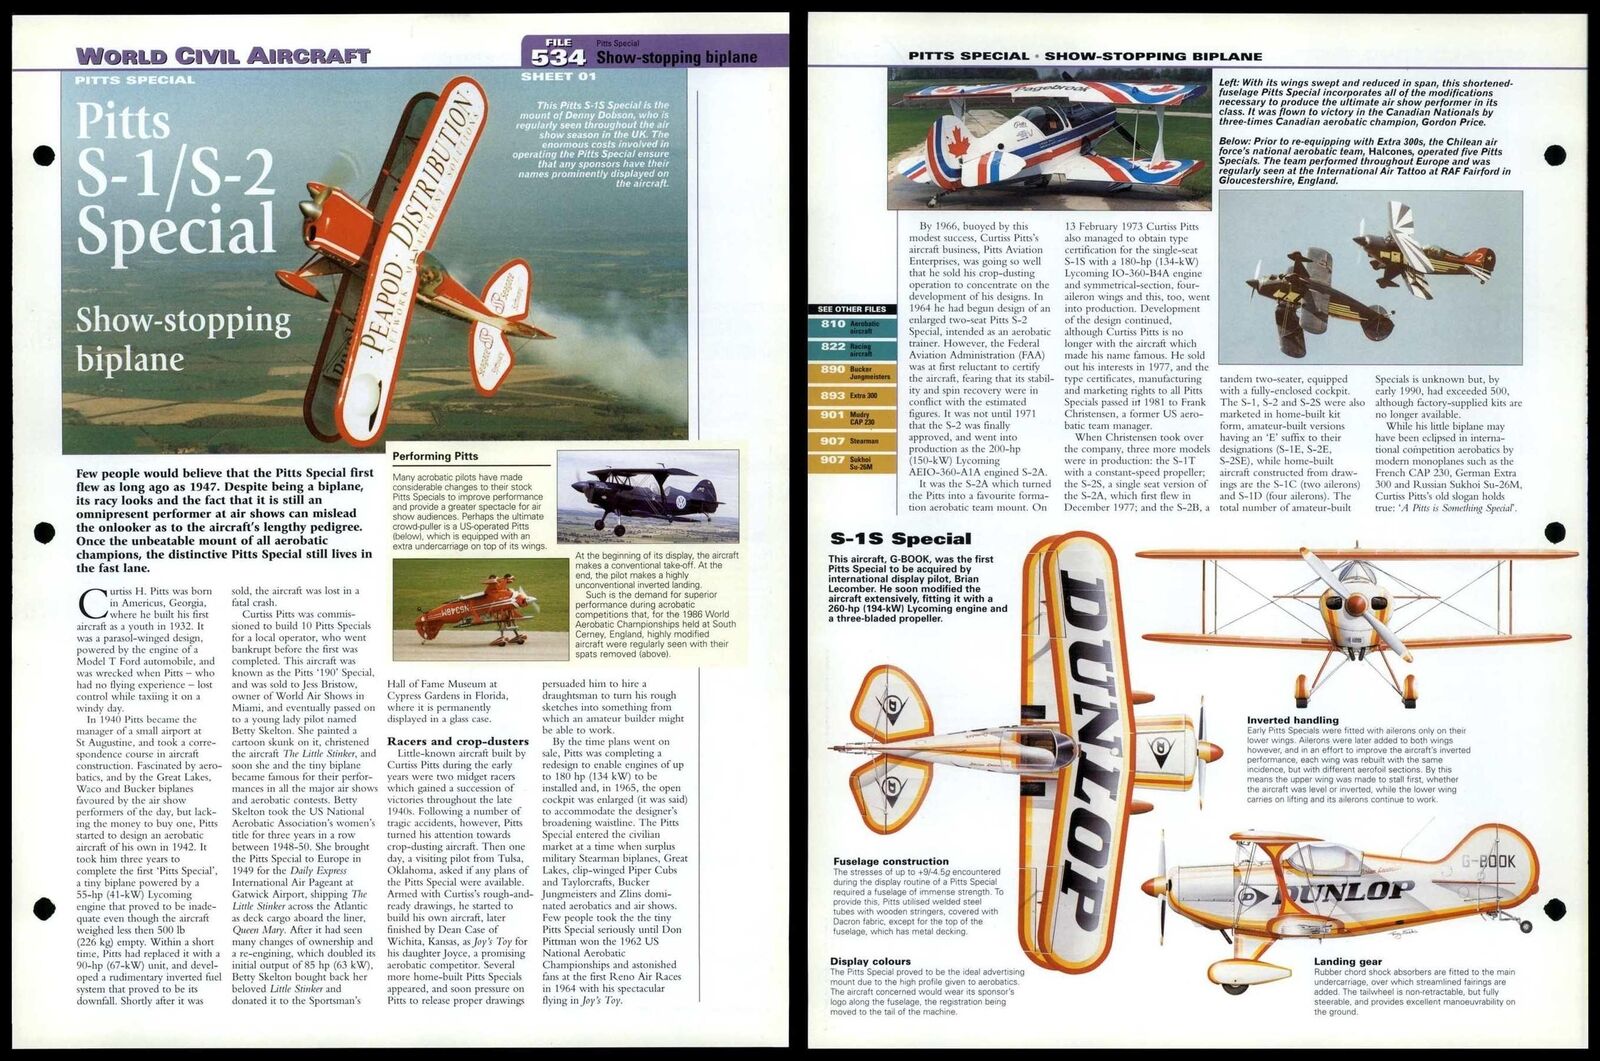 Pitts S-1 / S-2 Special - Civil Aircraft #534 World Aircraft Information Page